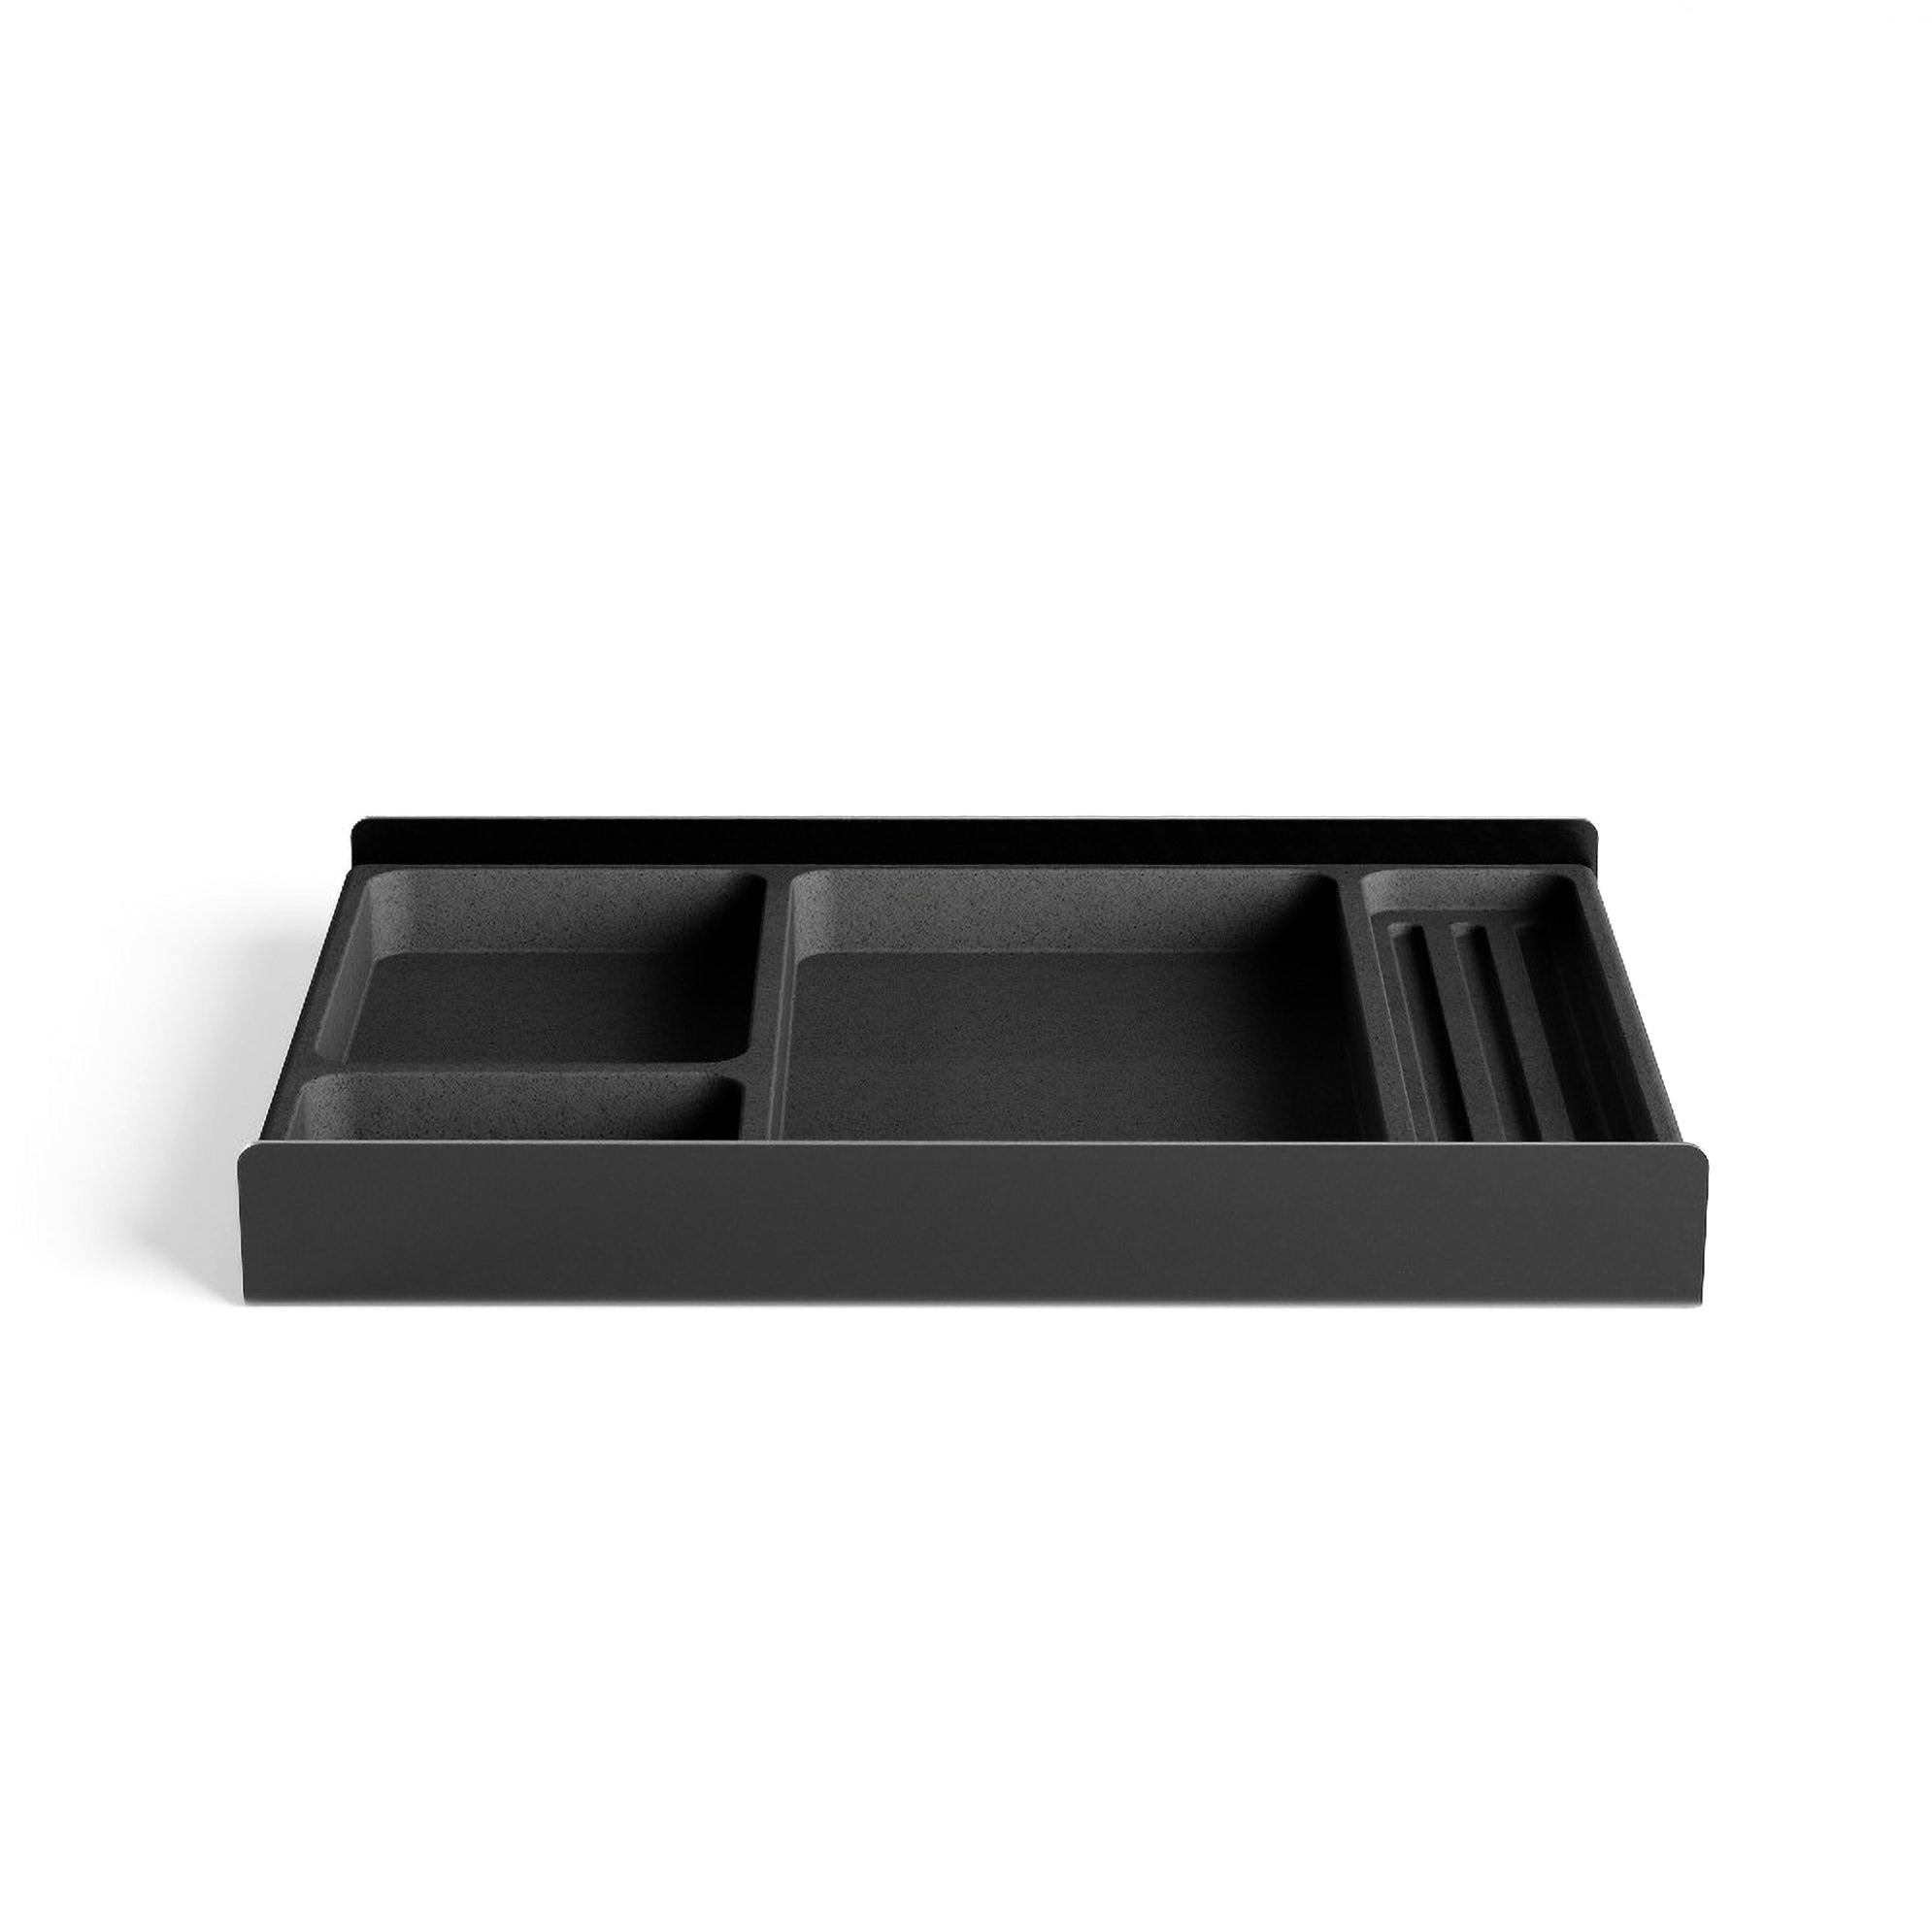 Large Work-Play Tray, Black, 21.25 x 13.25 Inches